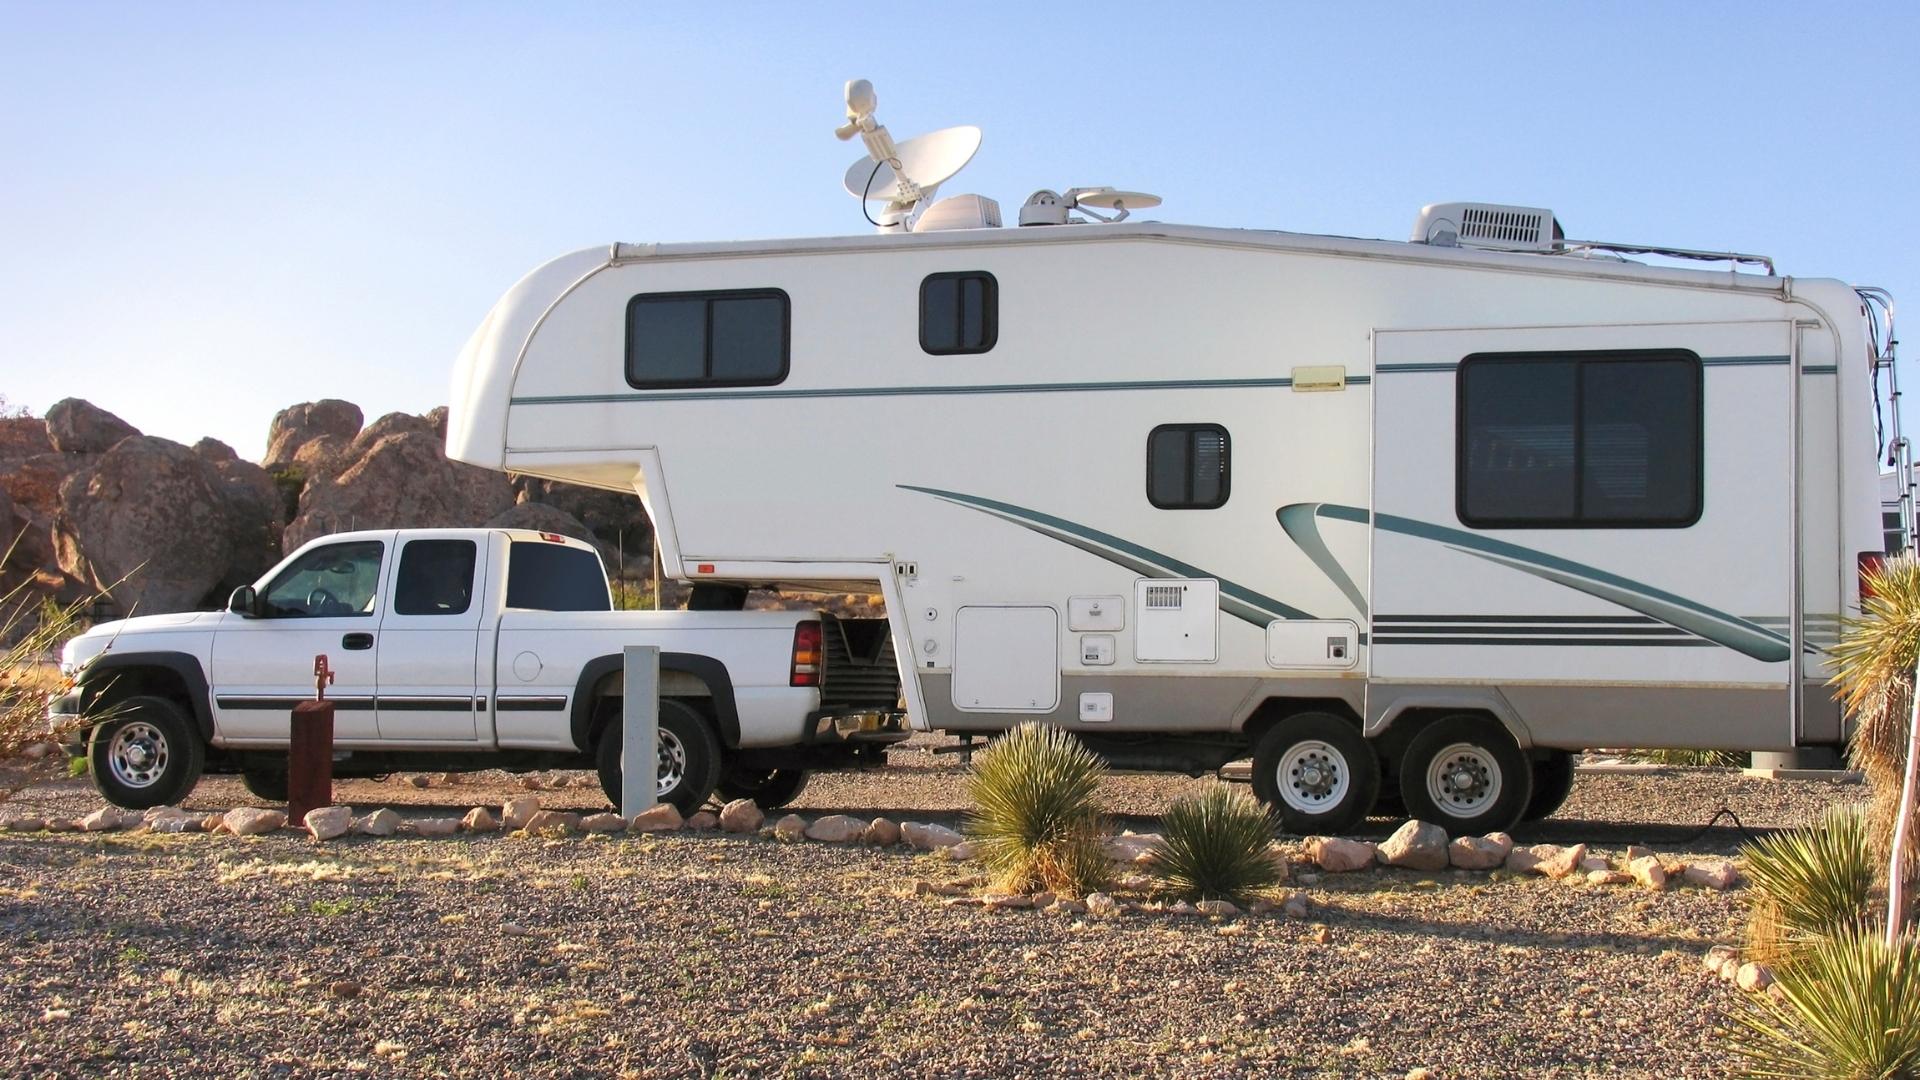 Photo of a type of RV called a "fifth wheel" or "5th wheel" or "Fiver" in RV slang terms.